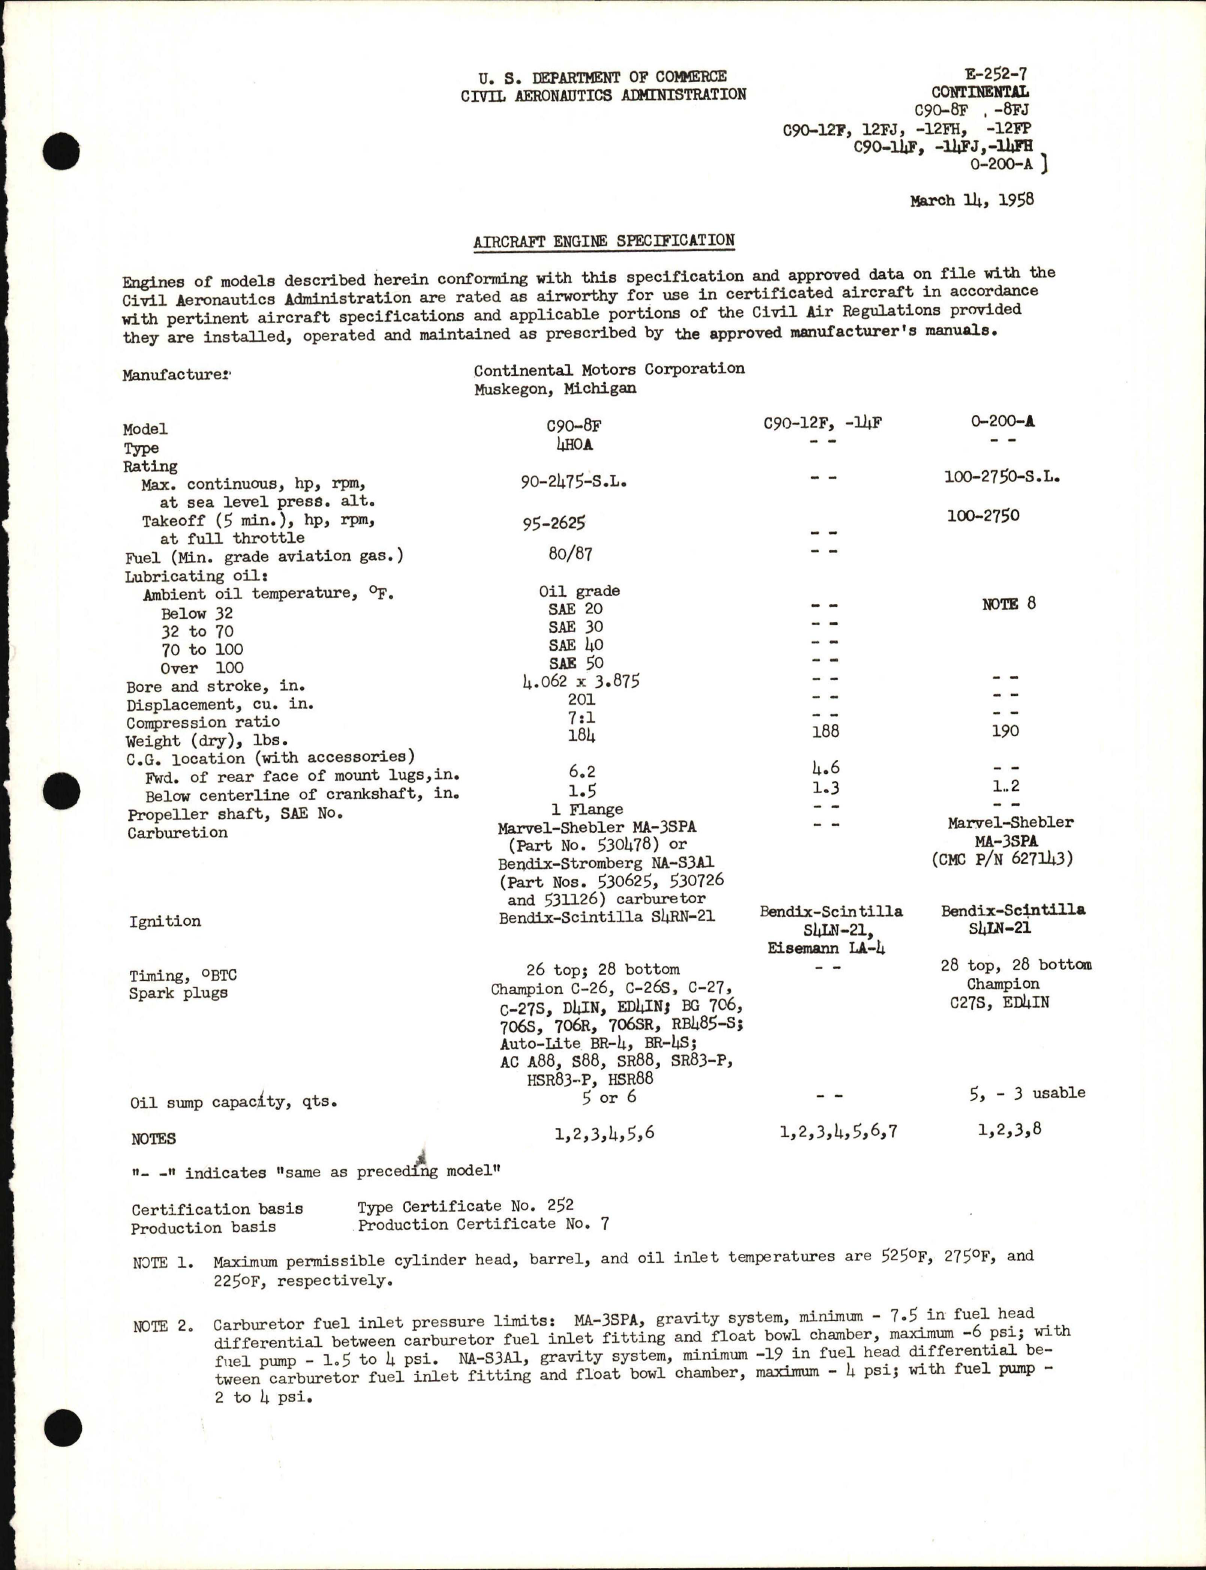 Sample page 1 from AirCorps Library document: C90 and 0-200-A